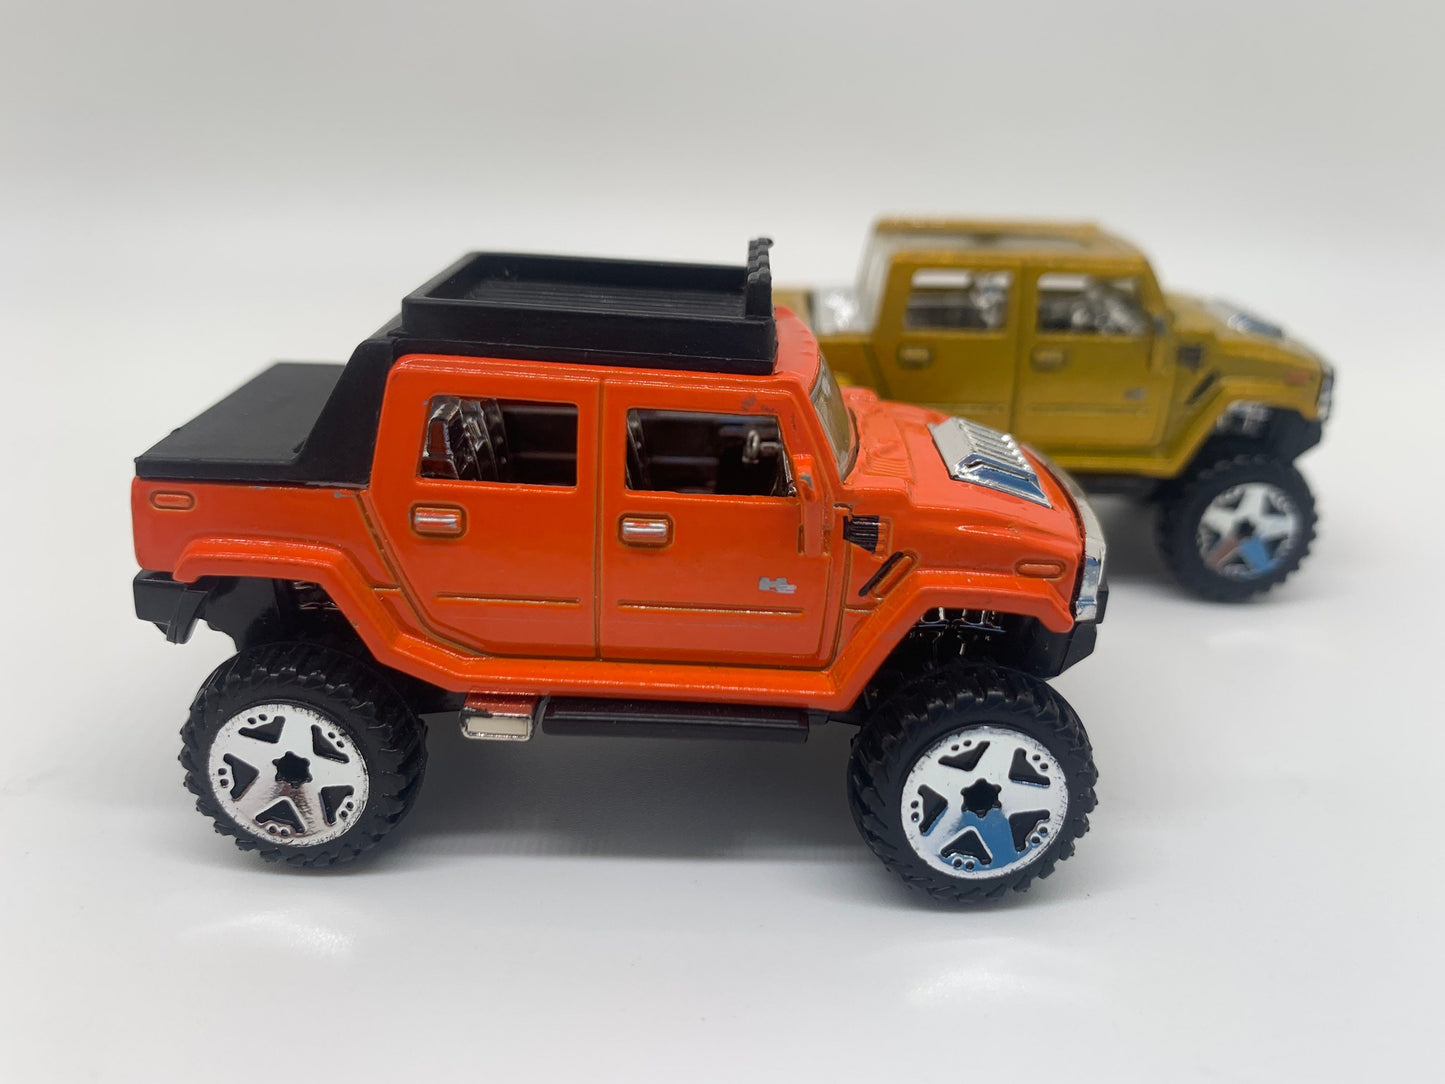 H2 Hummer - Diecast Vintage - Diecast Collectible - Miniature Model Toy Car - Hot Wheels Car - Hot Wheels